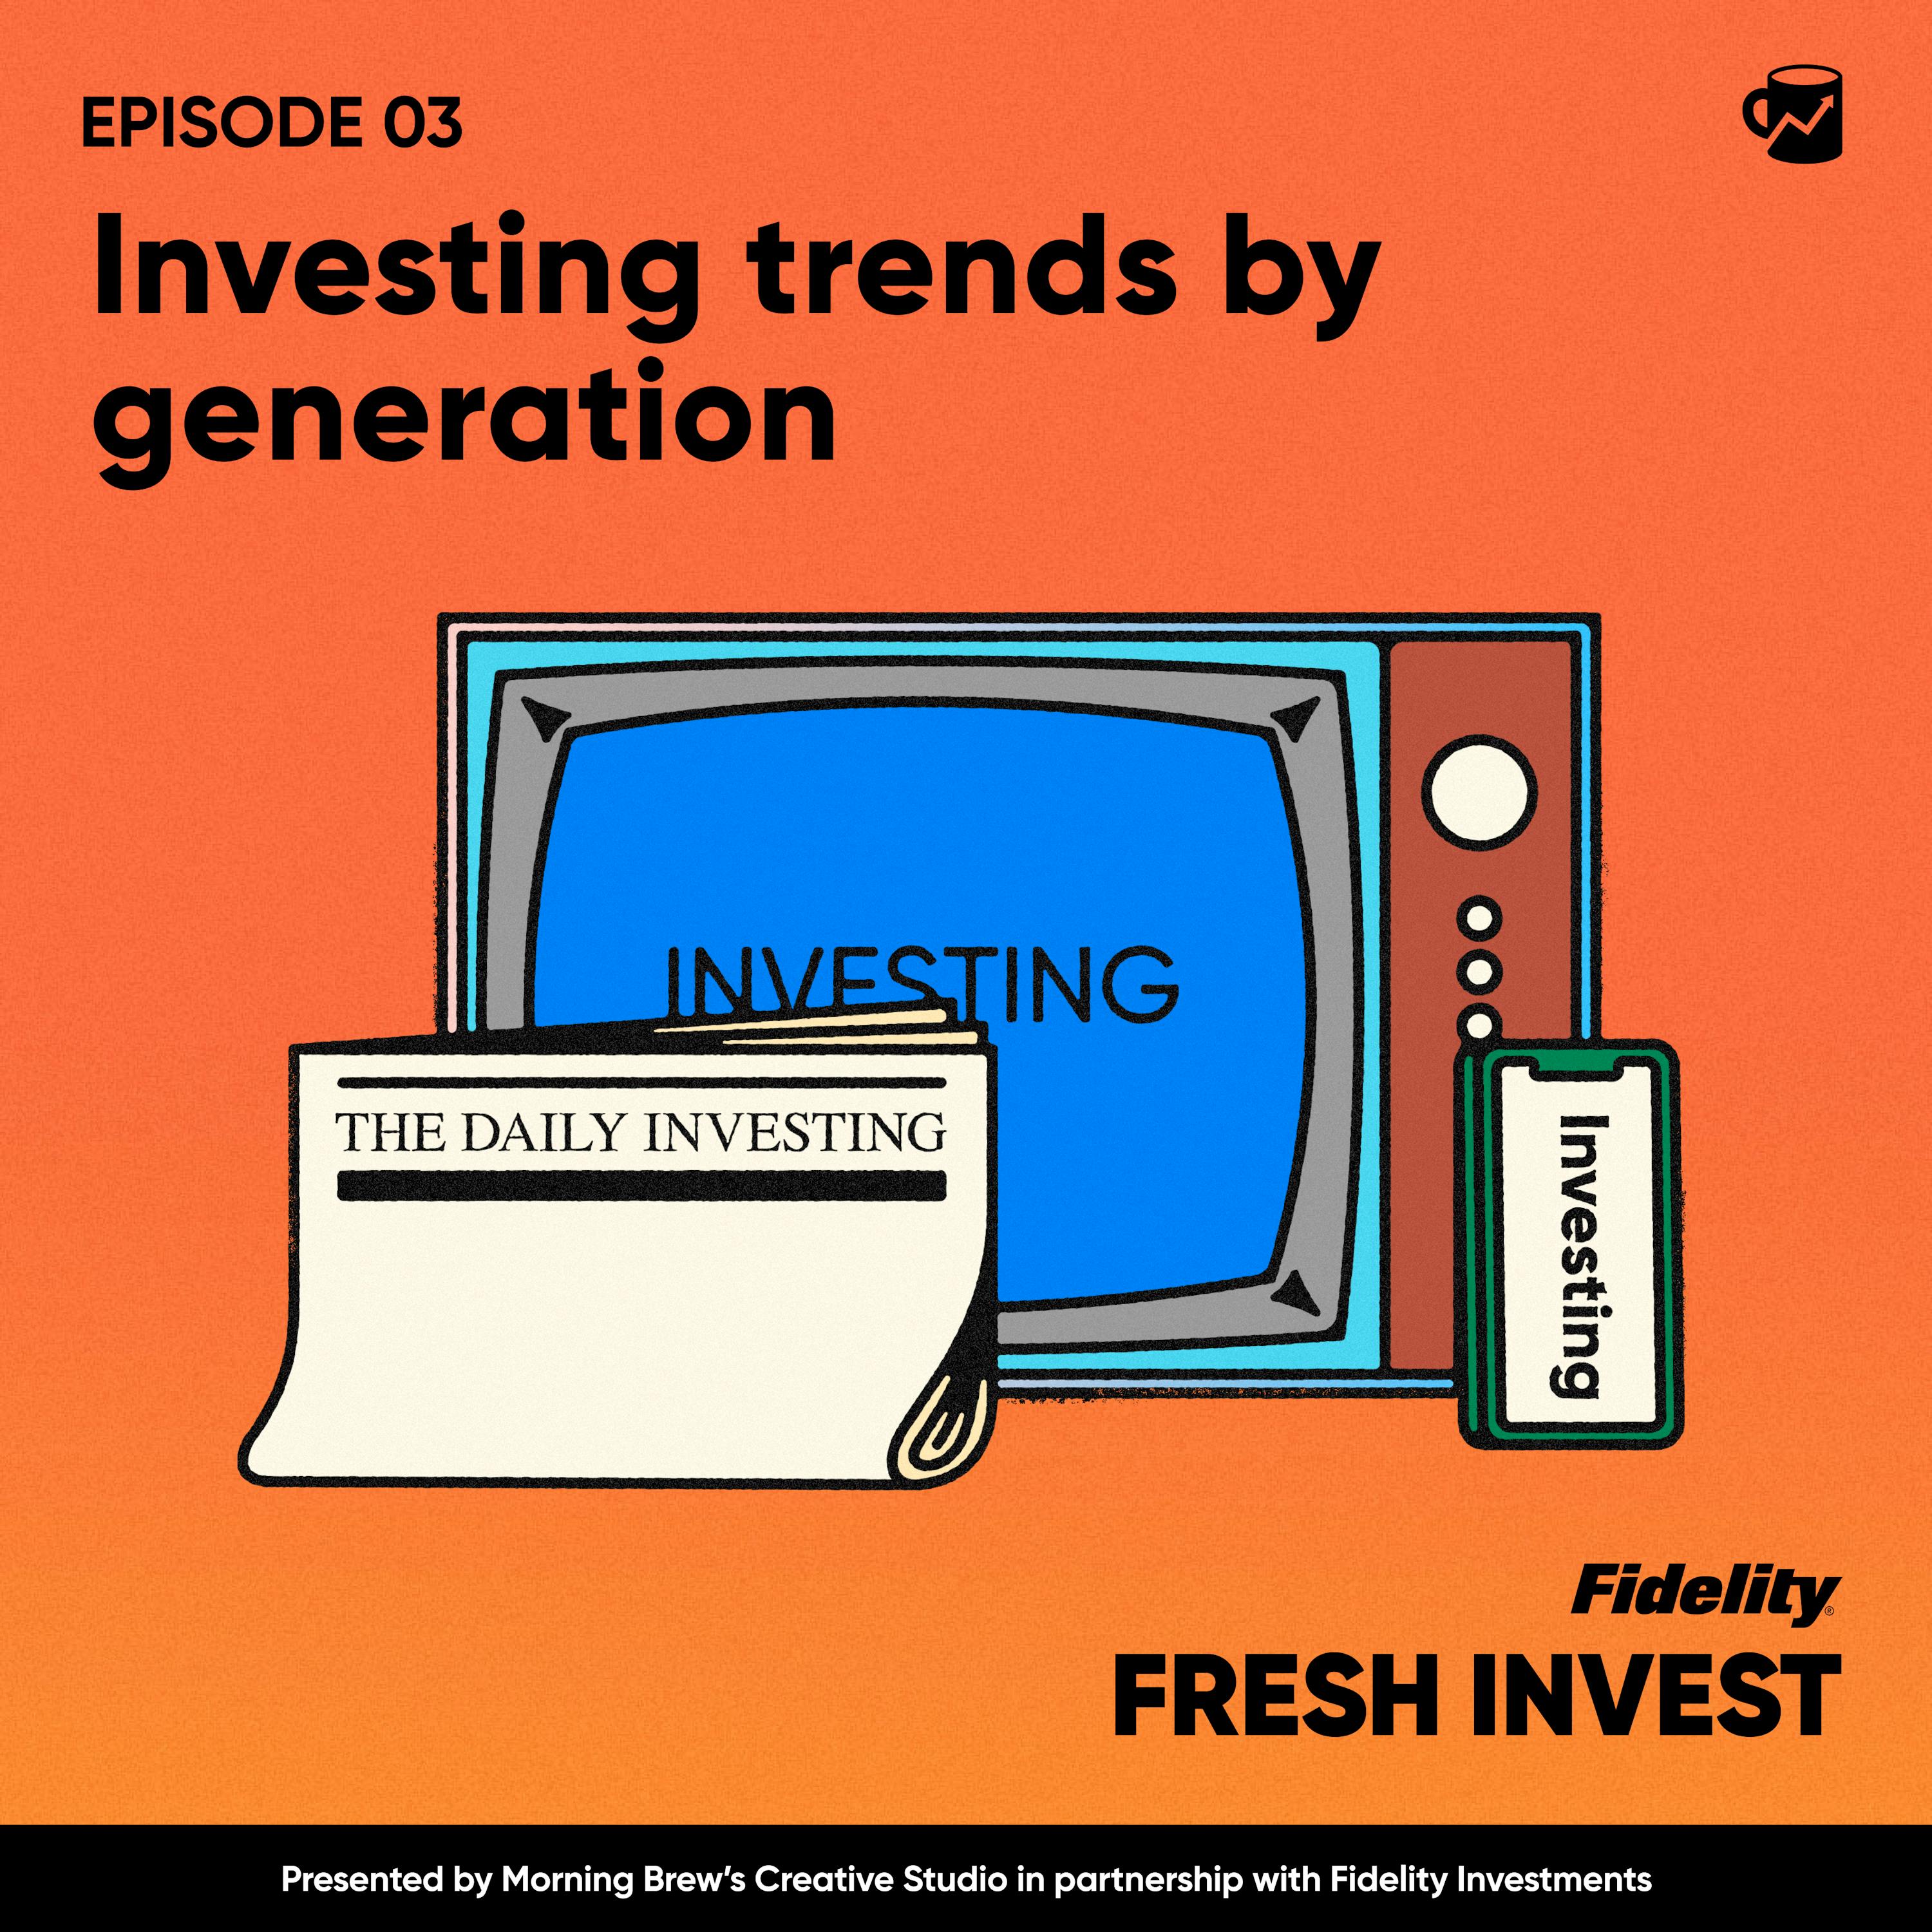 Investing trends by generation